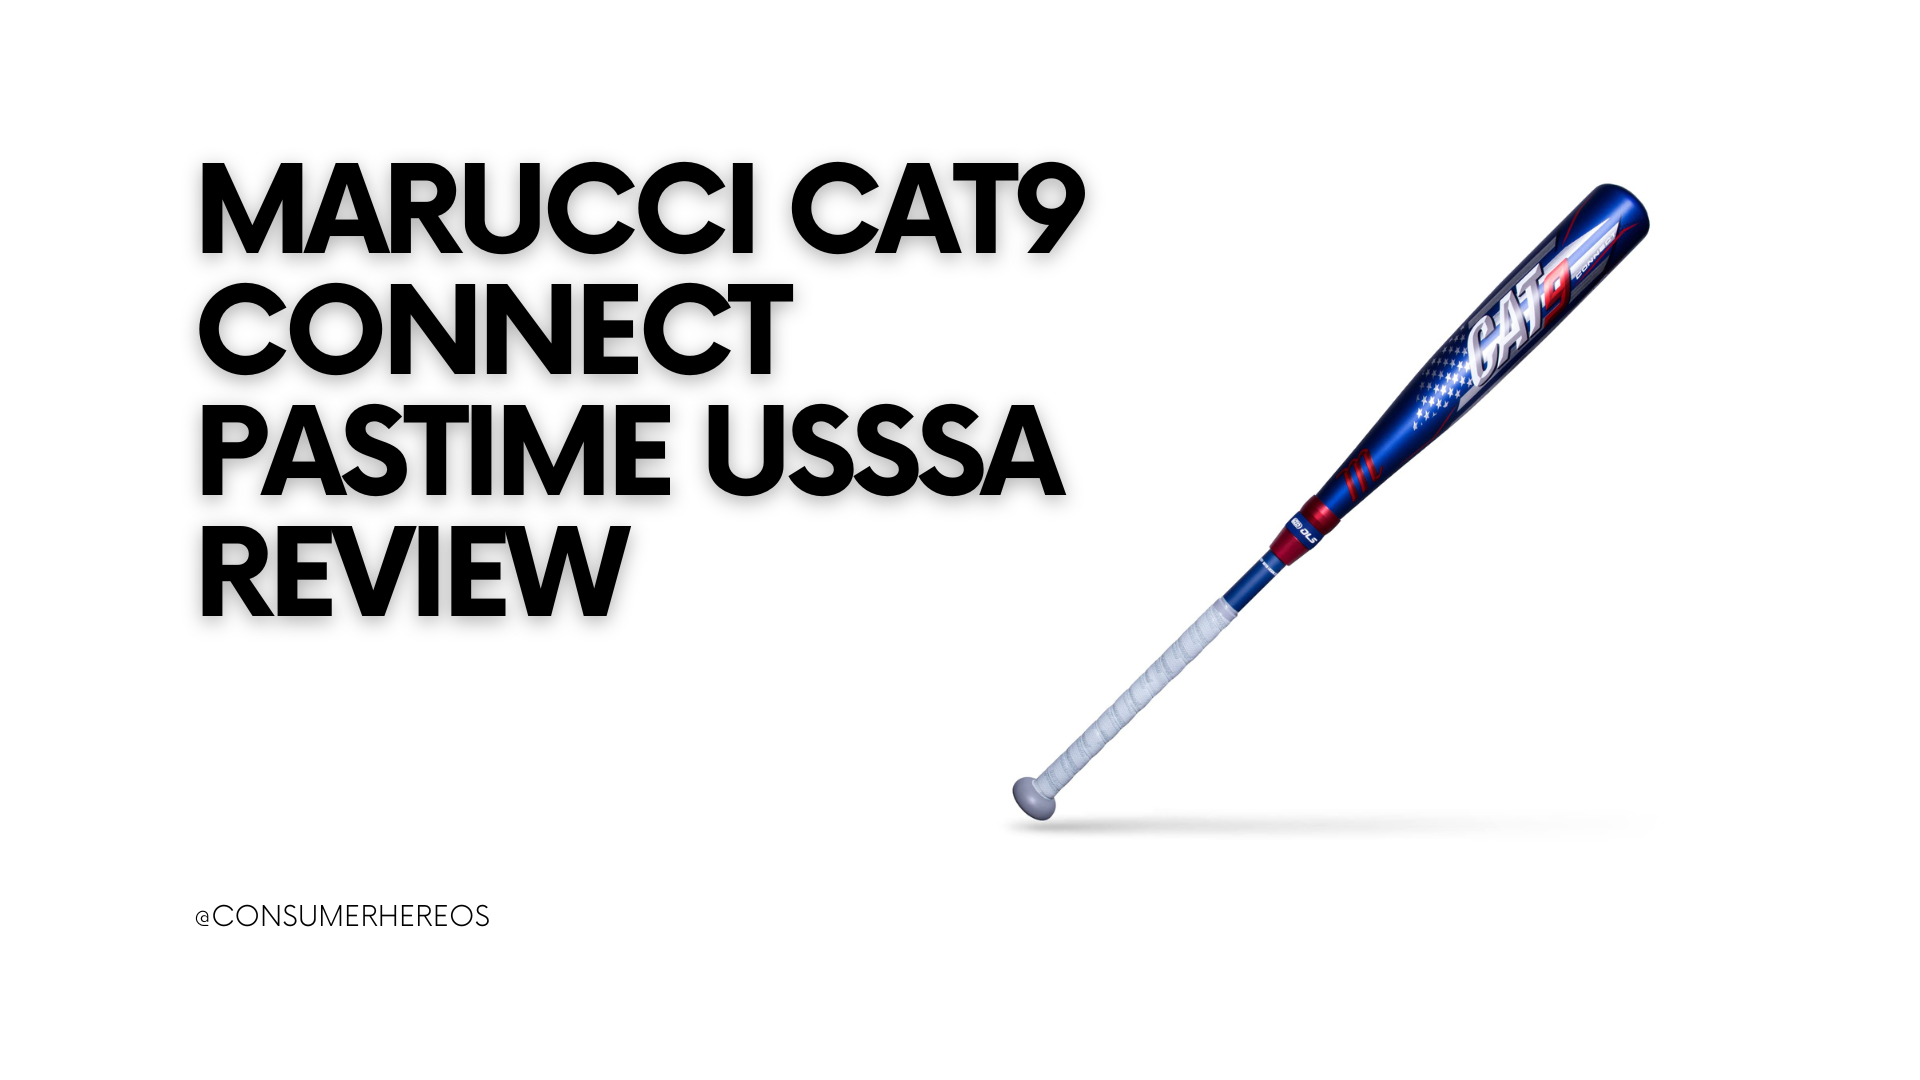 Marucci CAt9 Connect Pastime USSSA Review